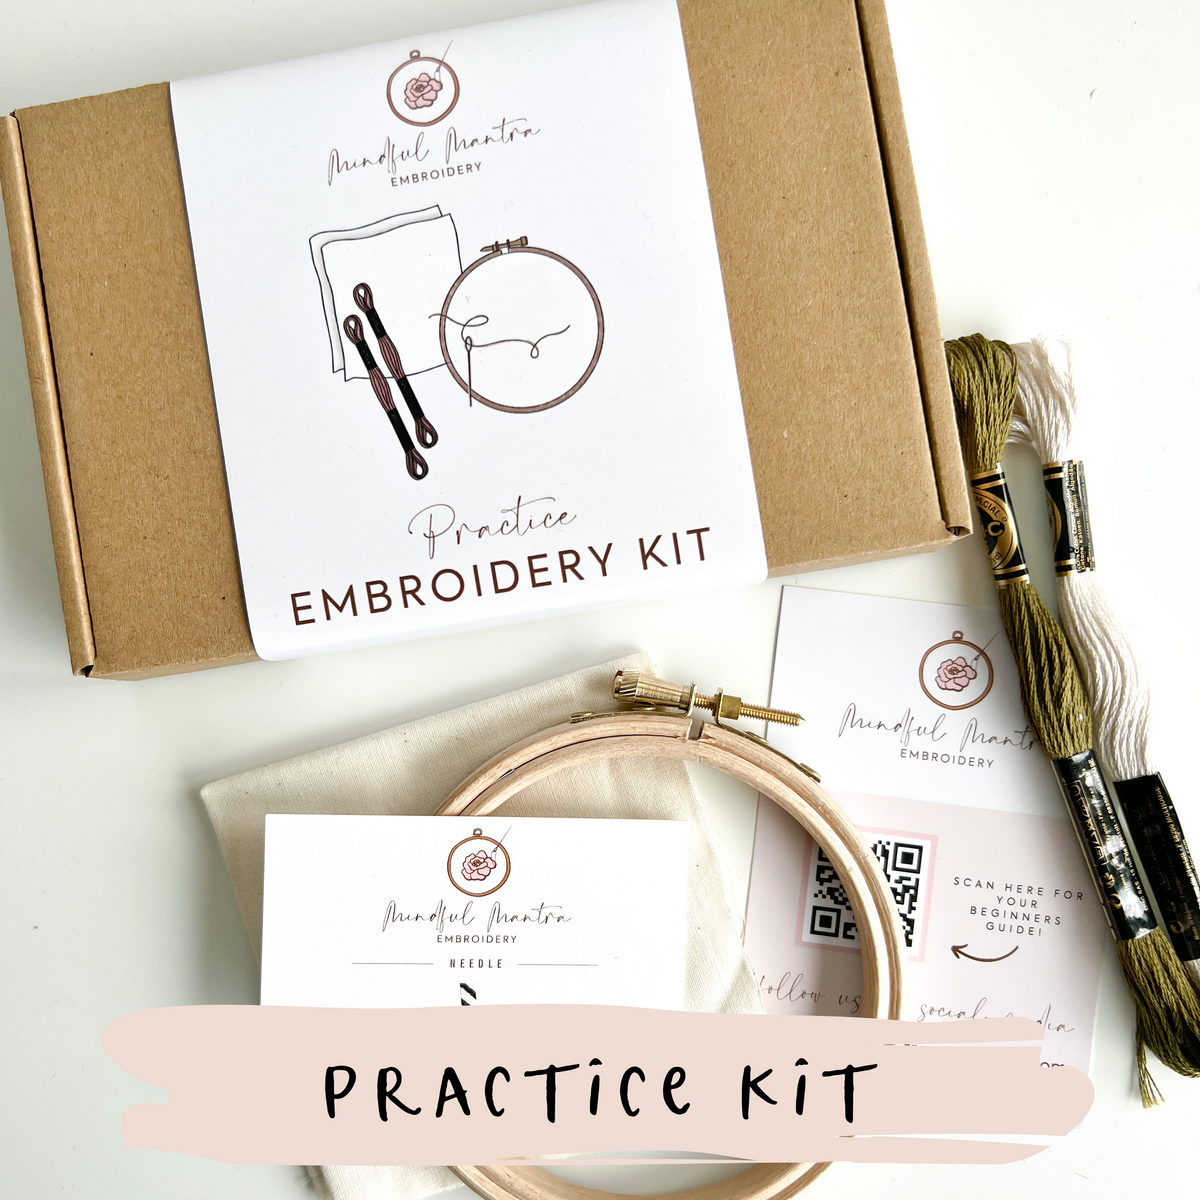 Learn-to-Stitch Embroidery Kit– Mindful Mantra Embroidery